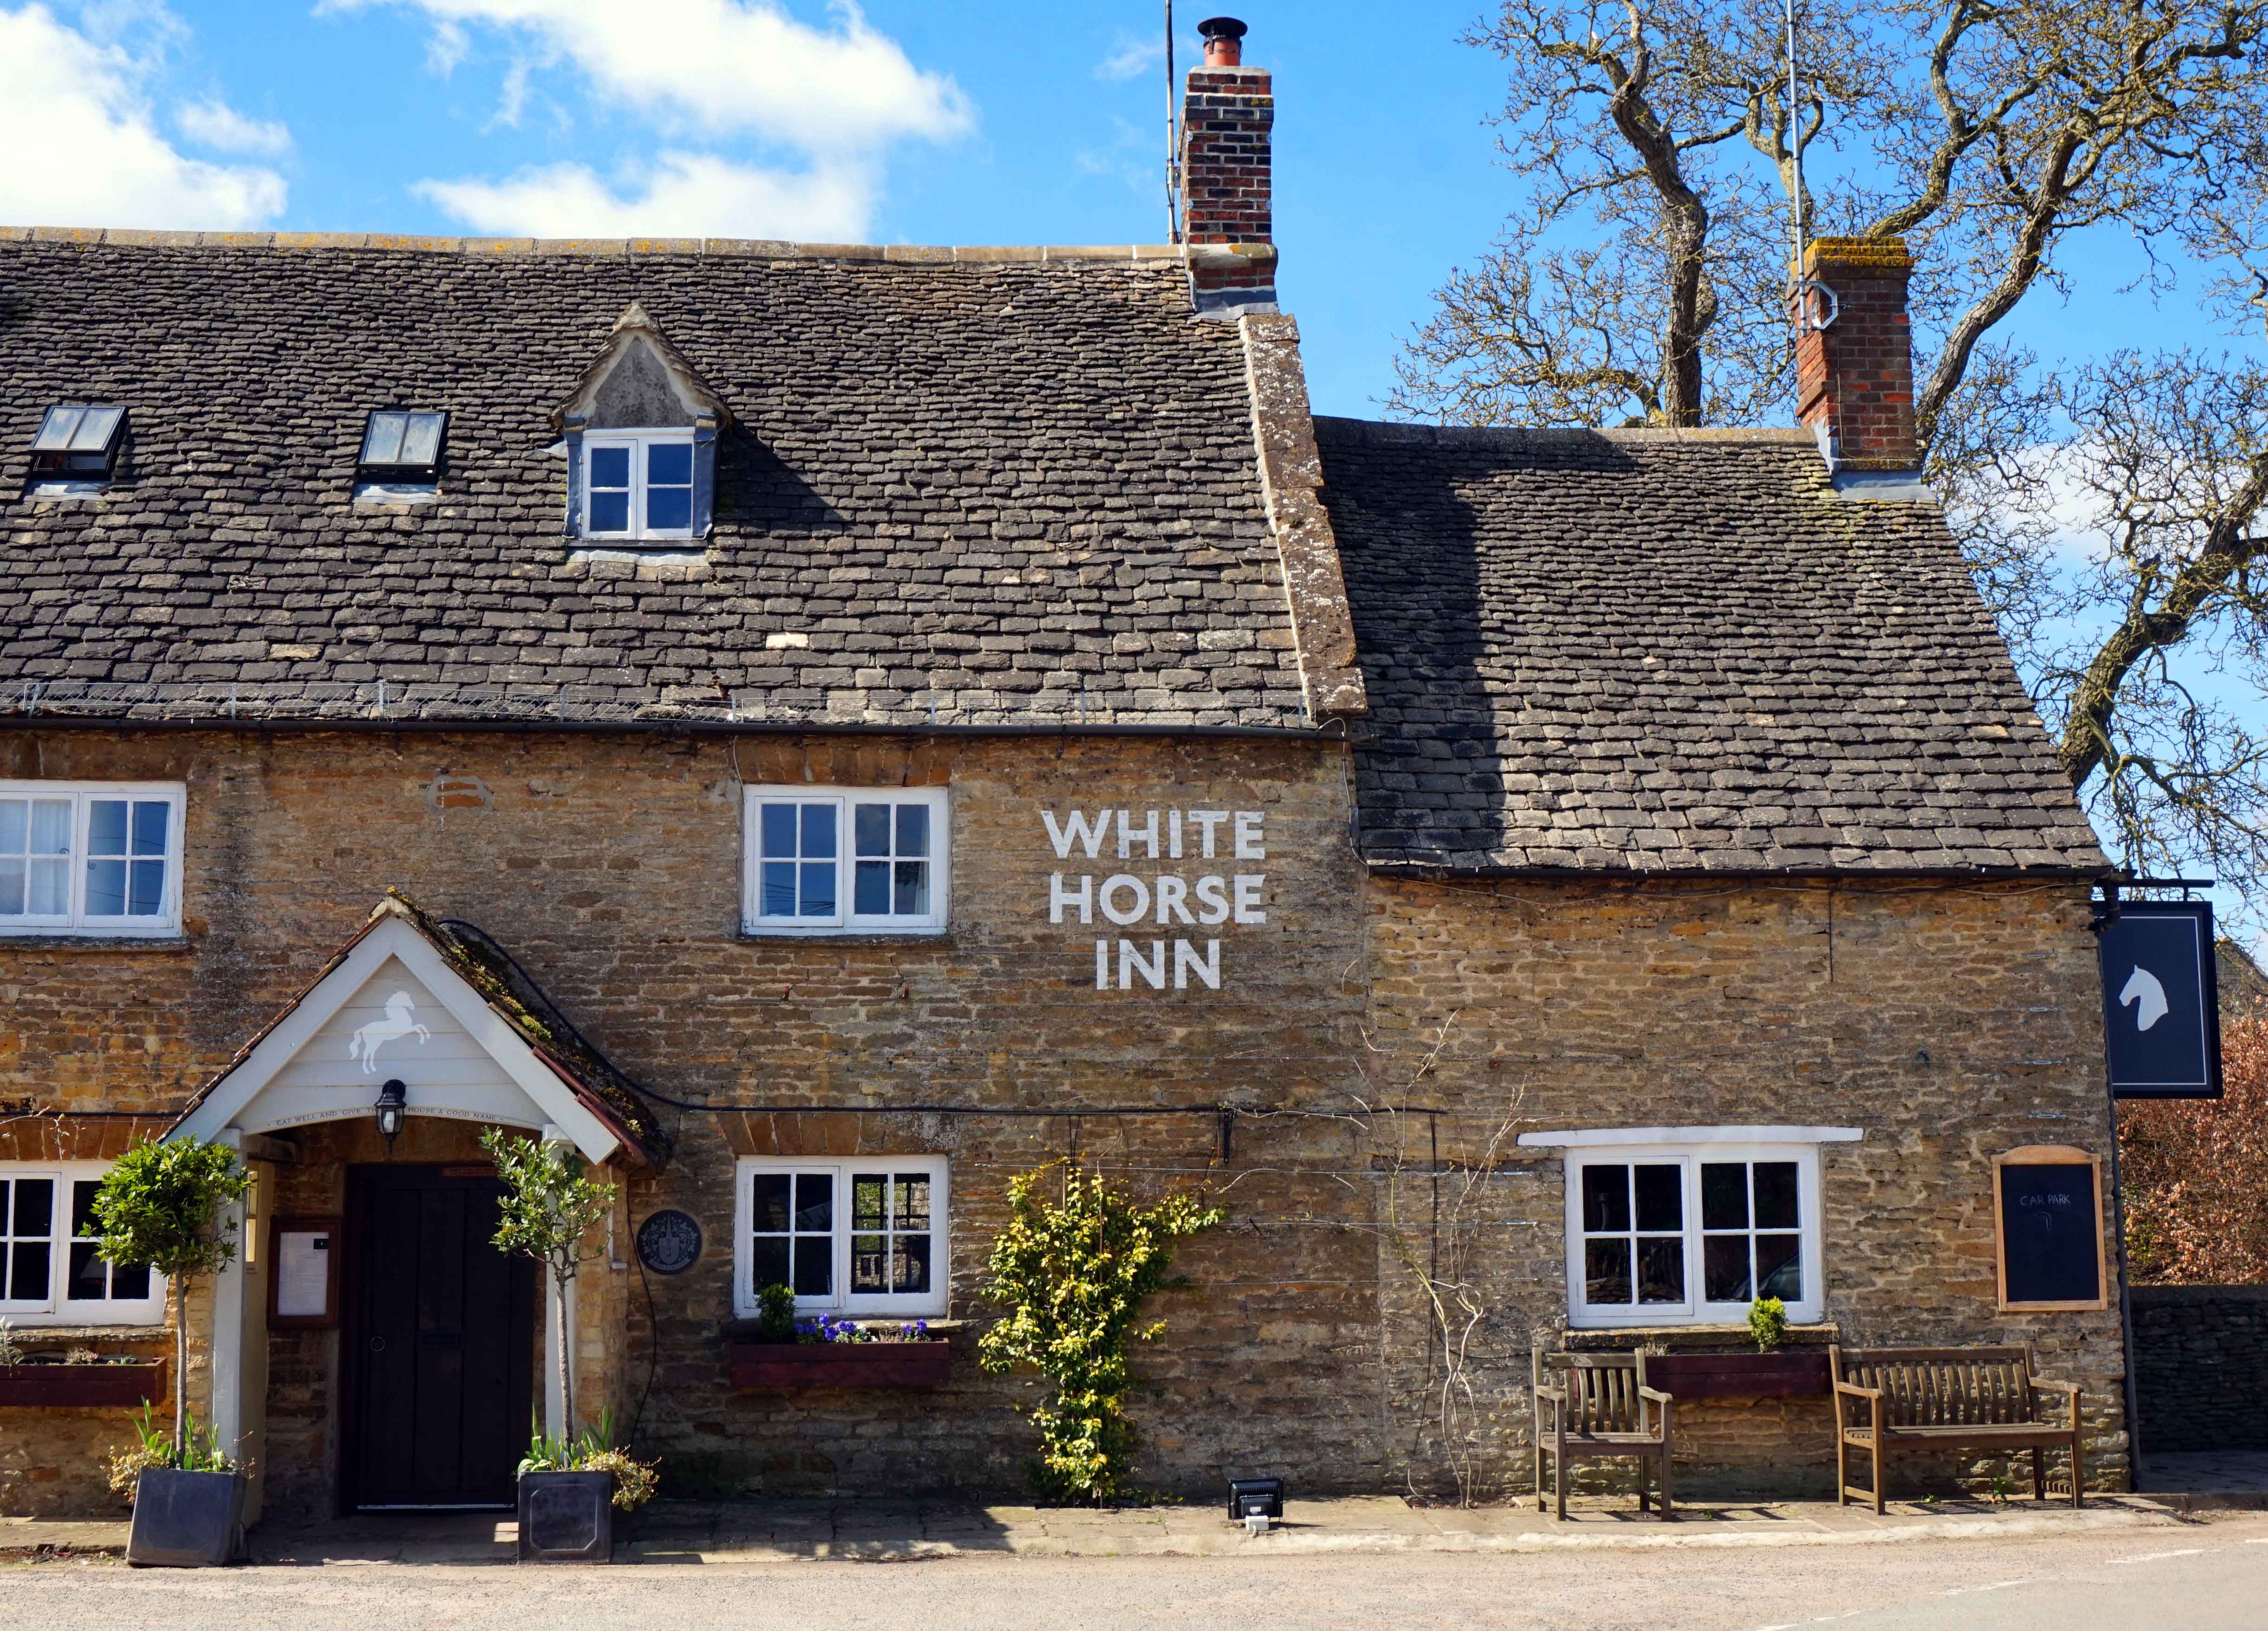 TheHotelaholic – REVIEW: The White Horse Inn, Daisy Hill, Duns Tew, Oxfordshire